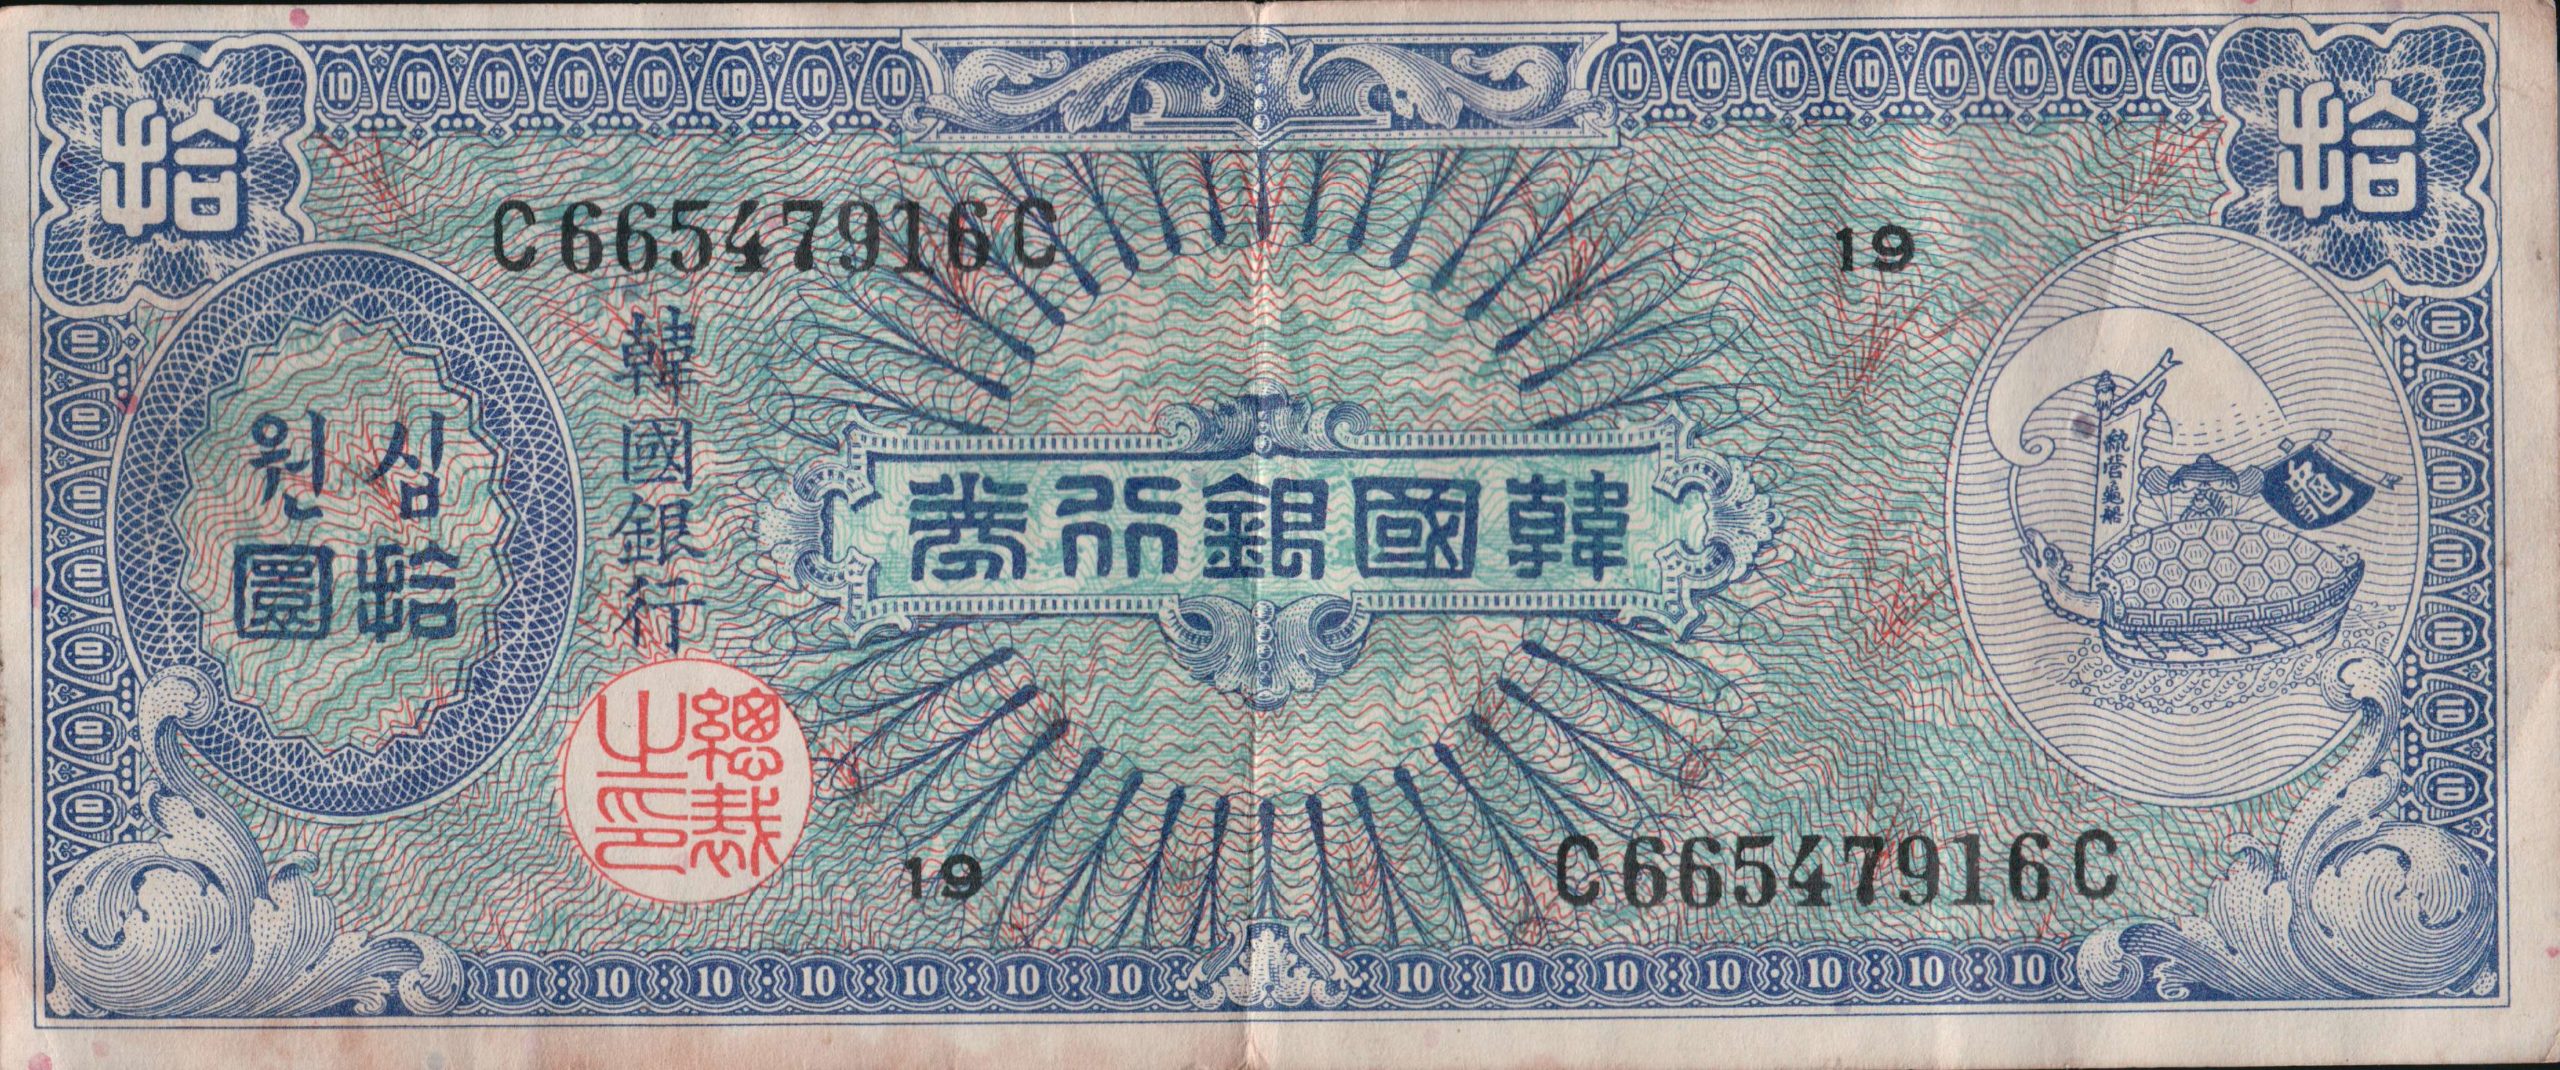 South Korean Currency 